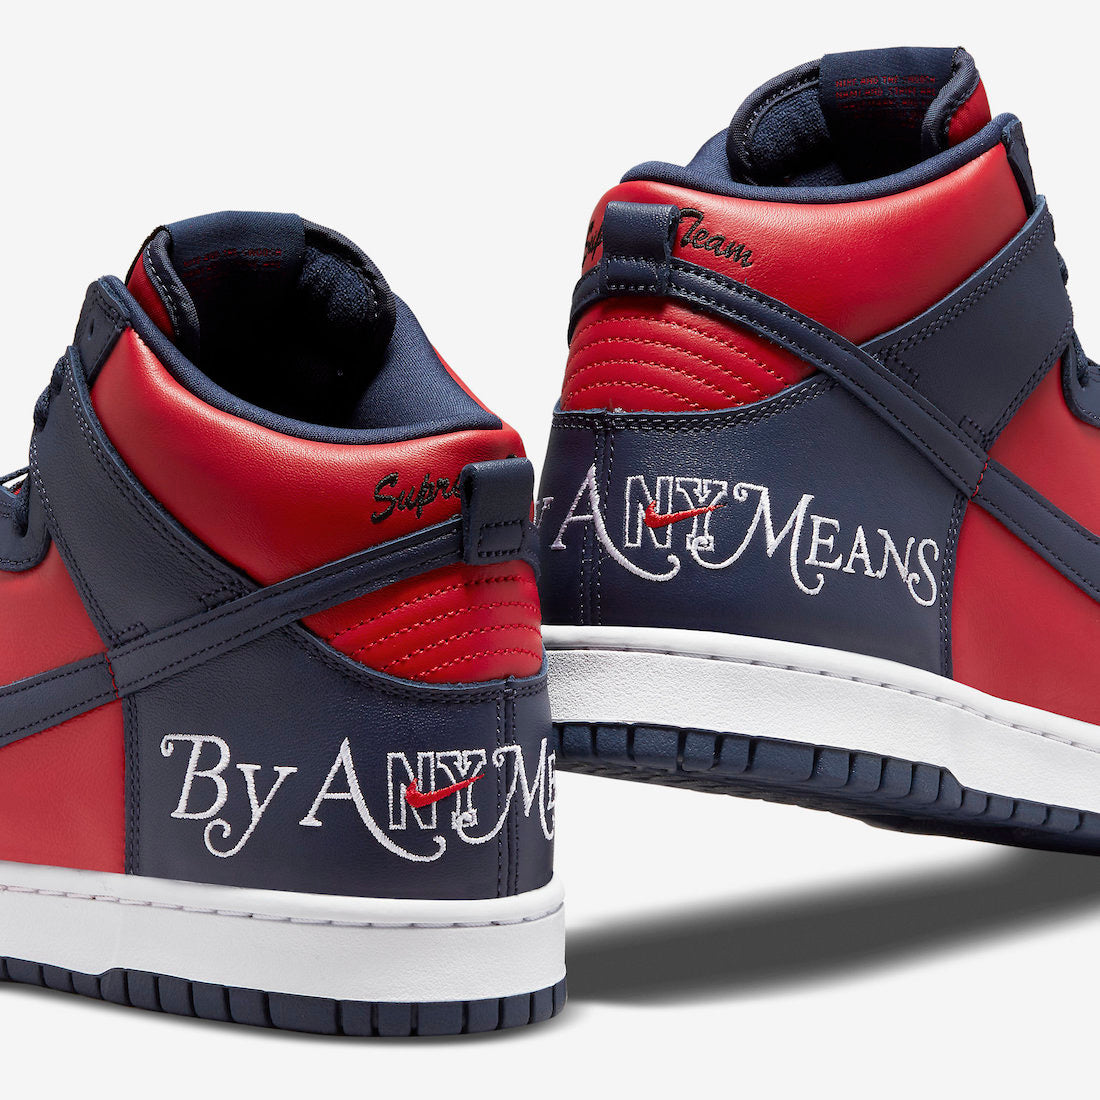 Supreme x Nike Dunk High "By Any Means - Red - Navy"